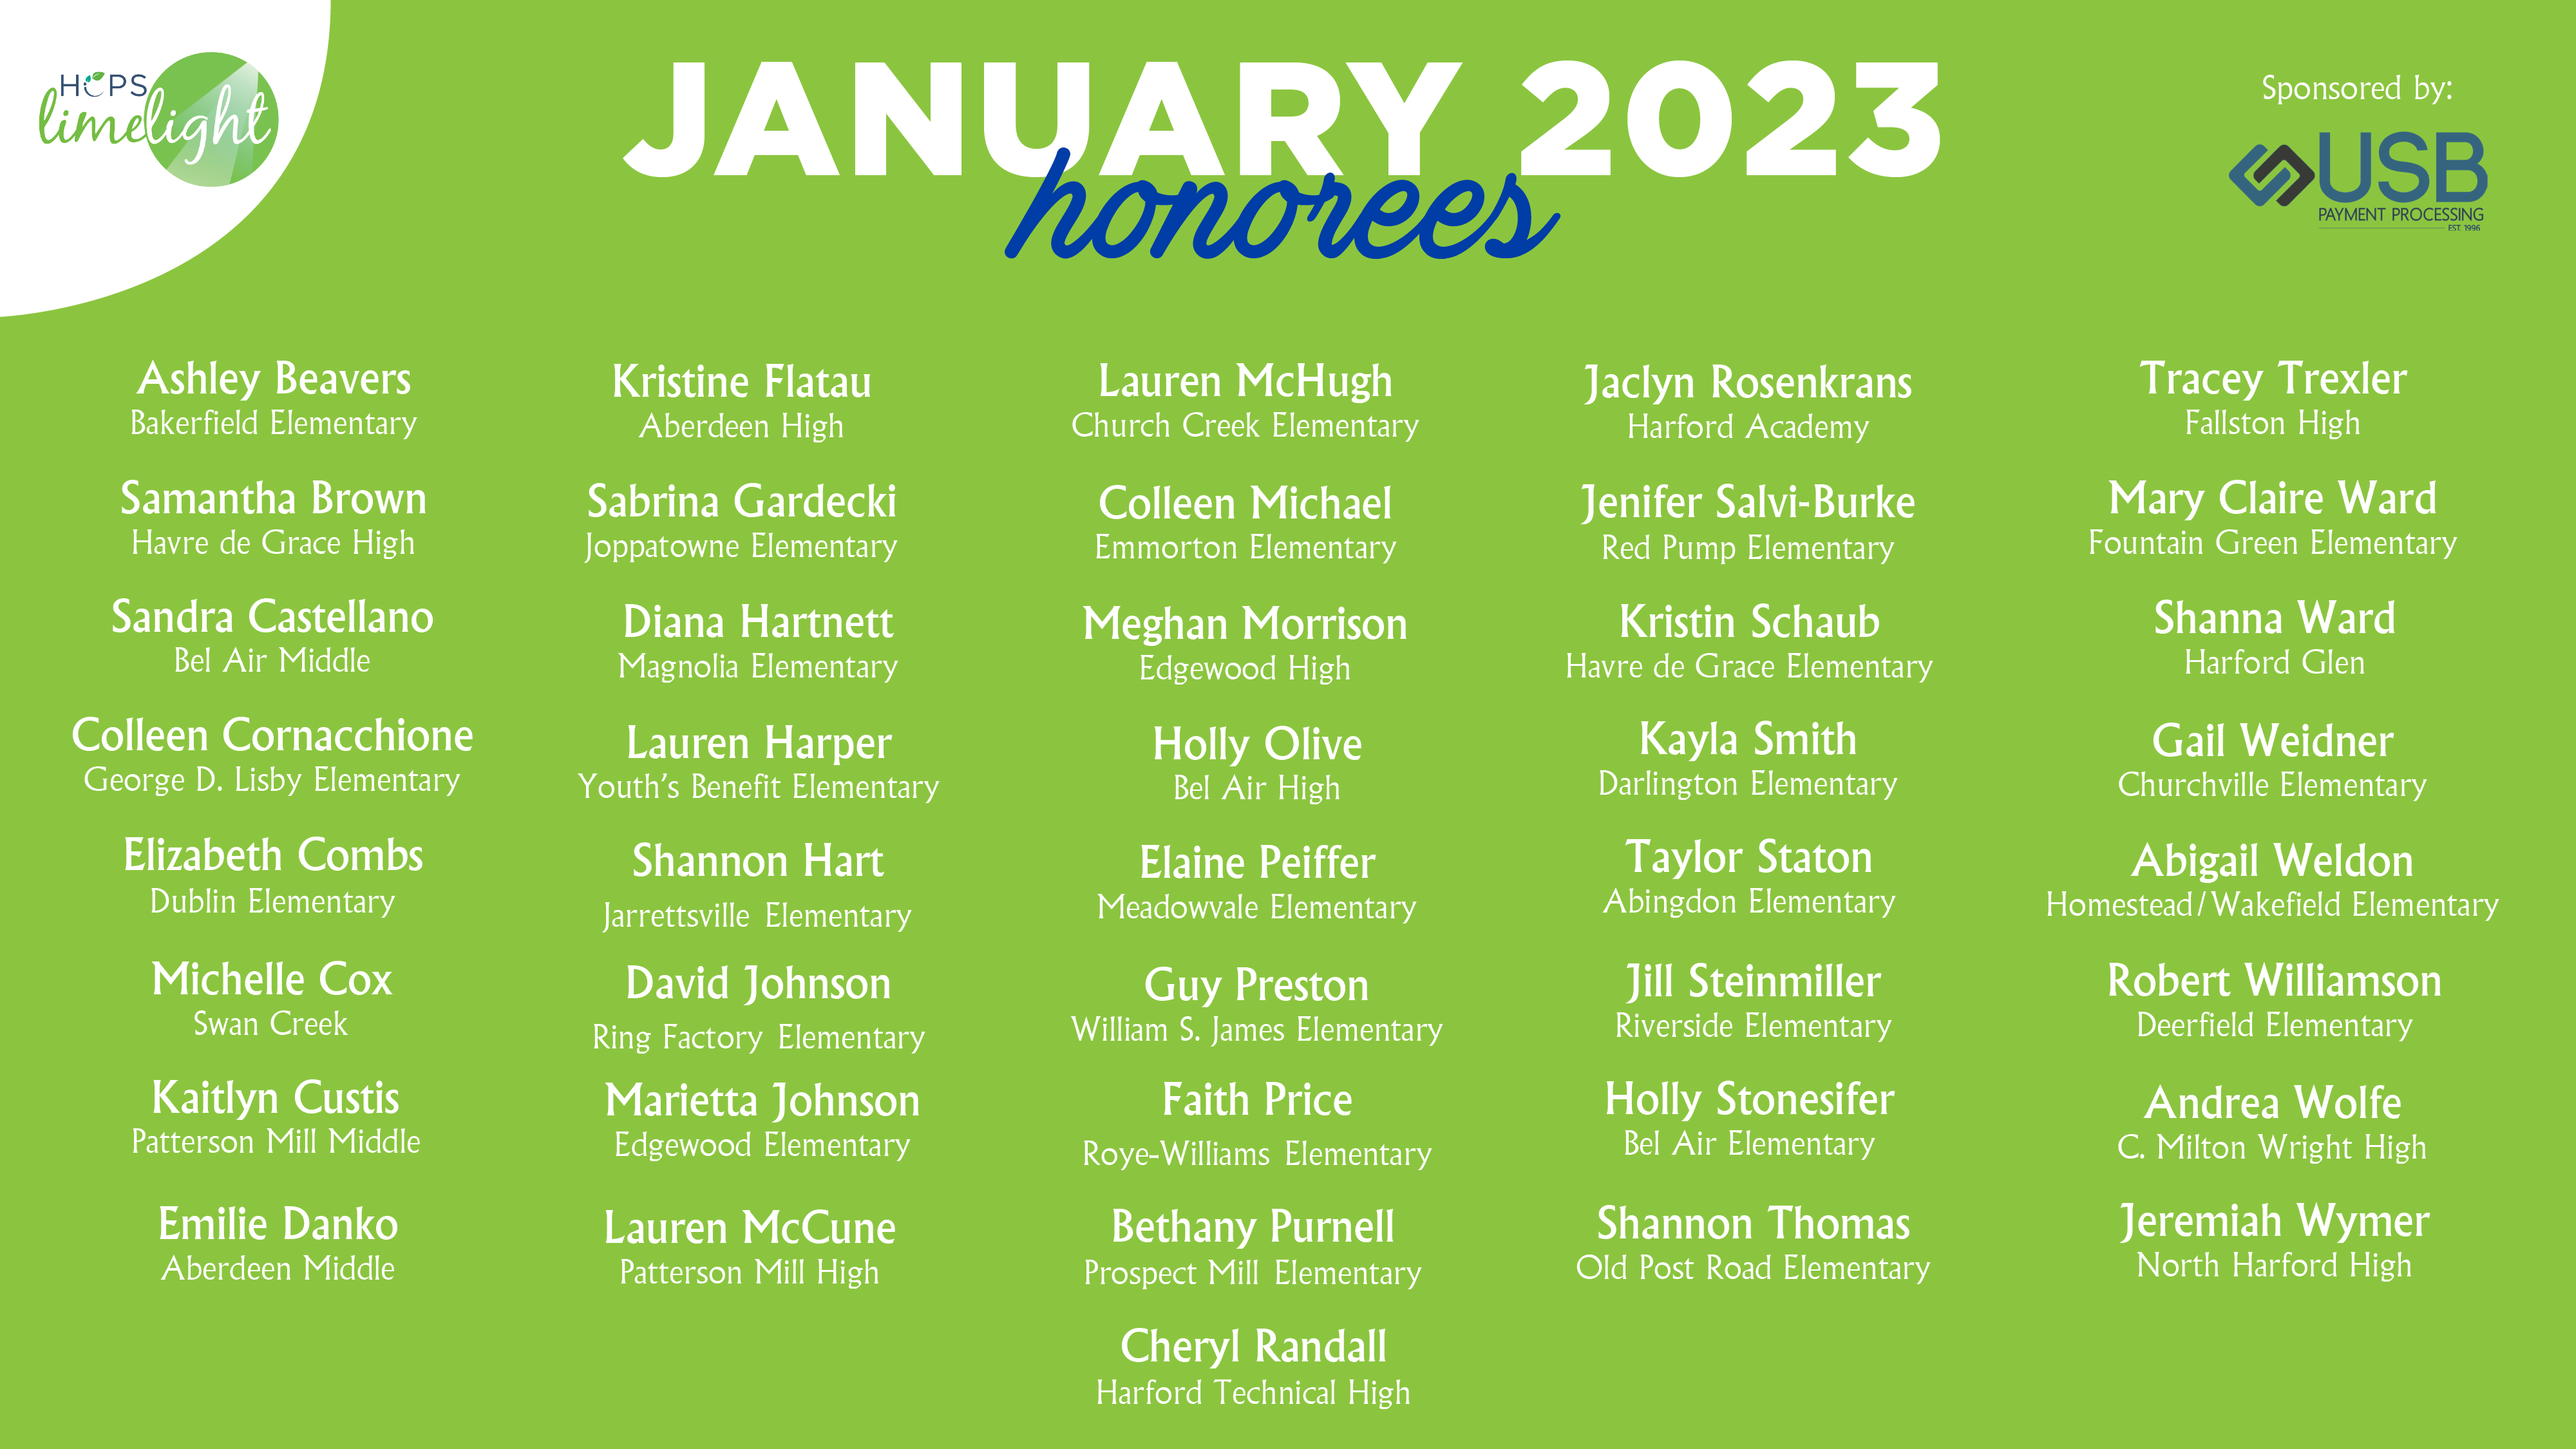 HCPS Limelight Honorees - January 2023